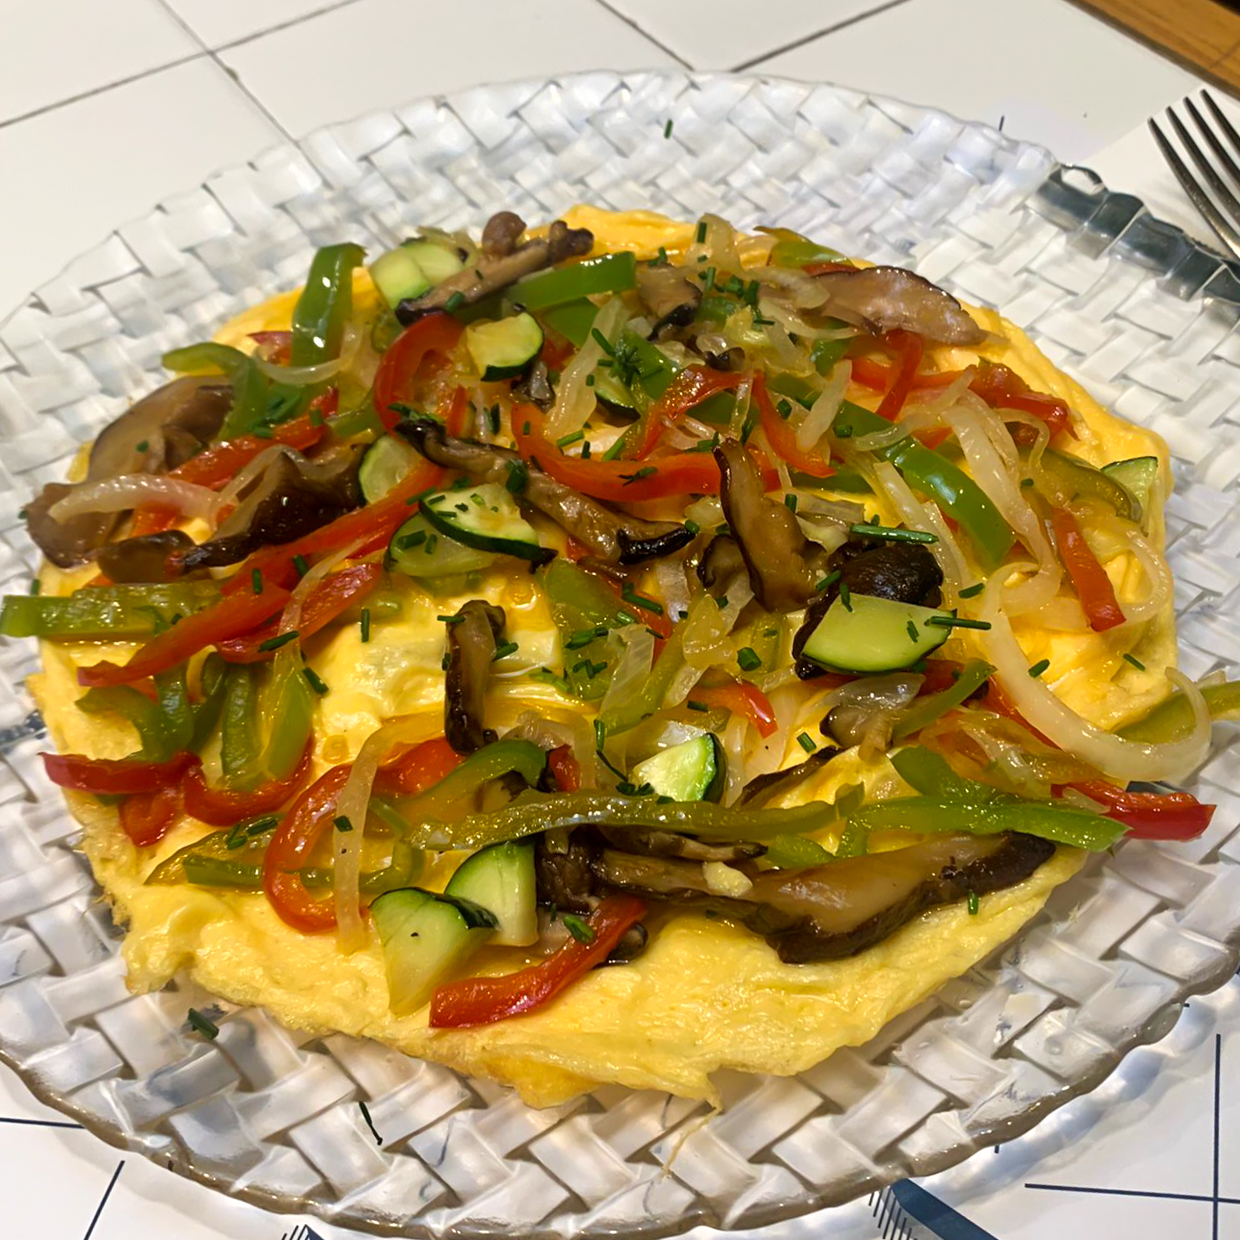 Omelette with vegetables and shitake